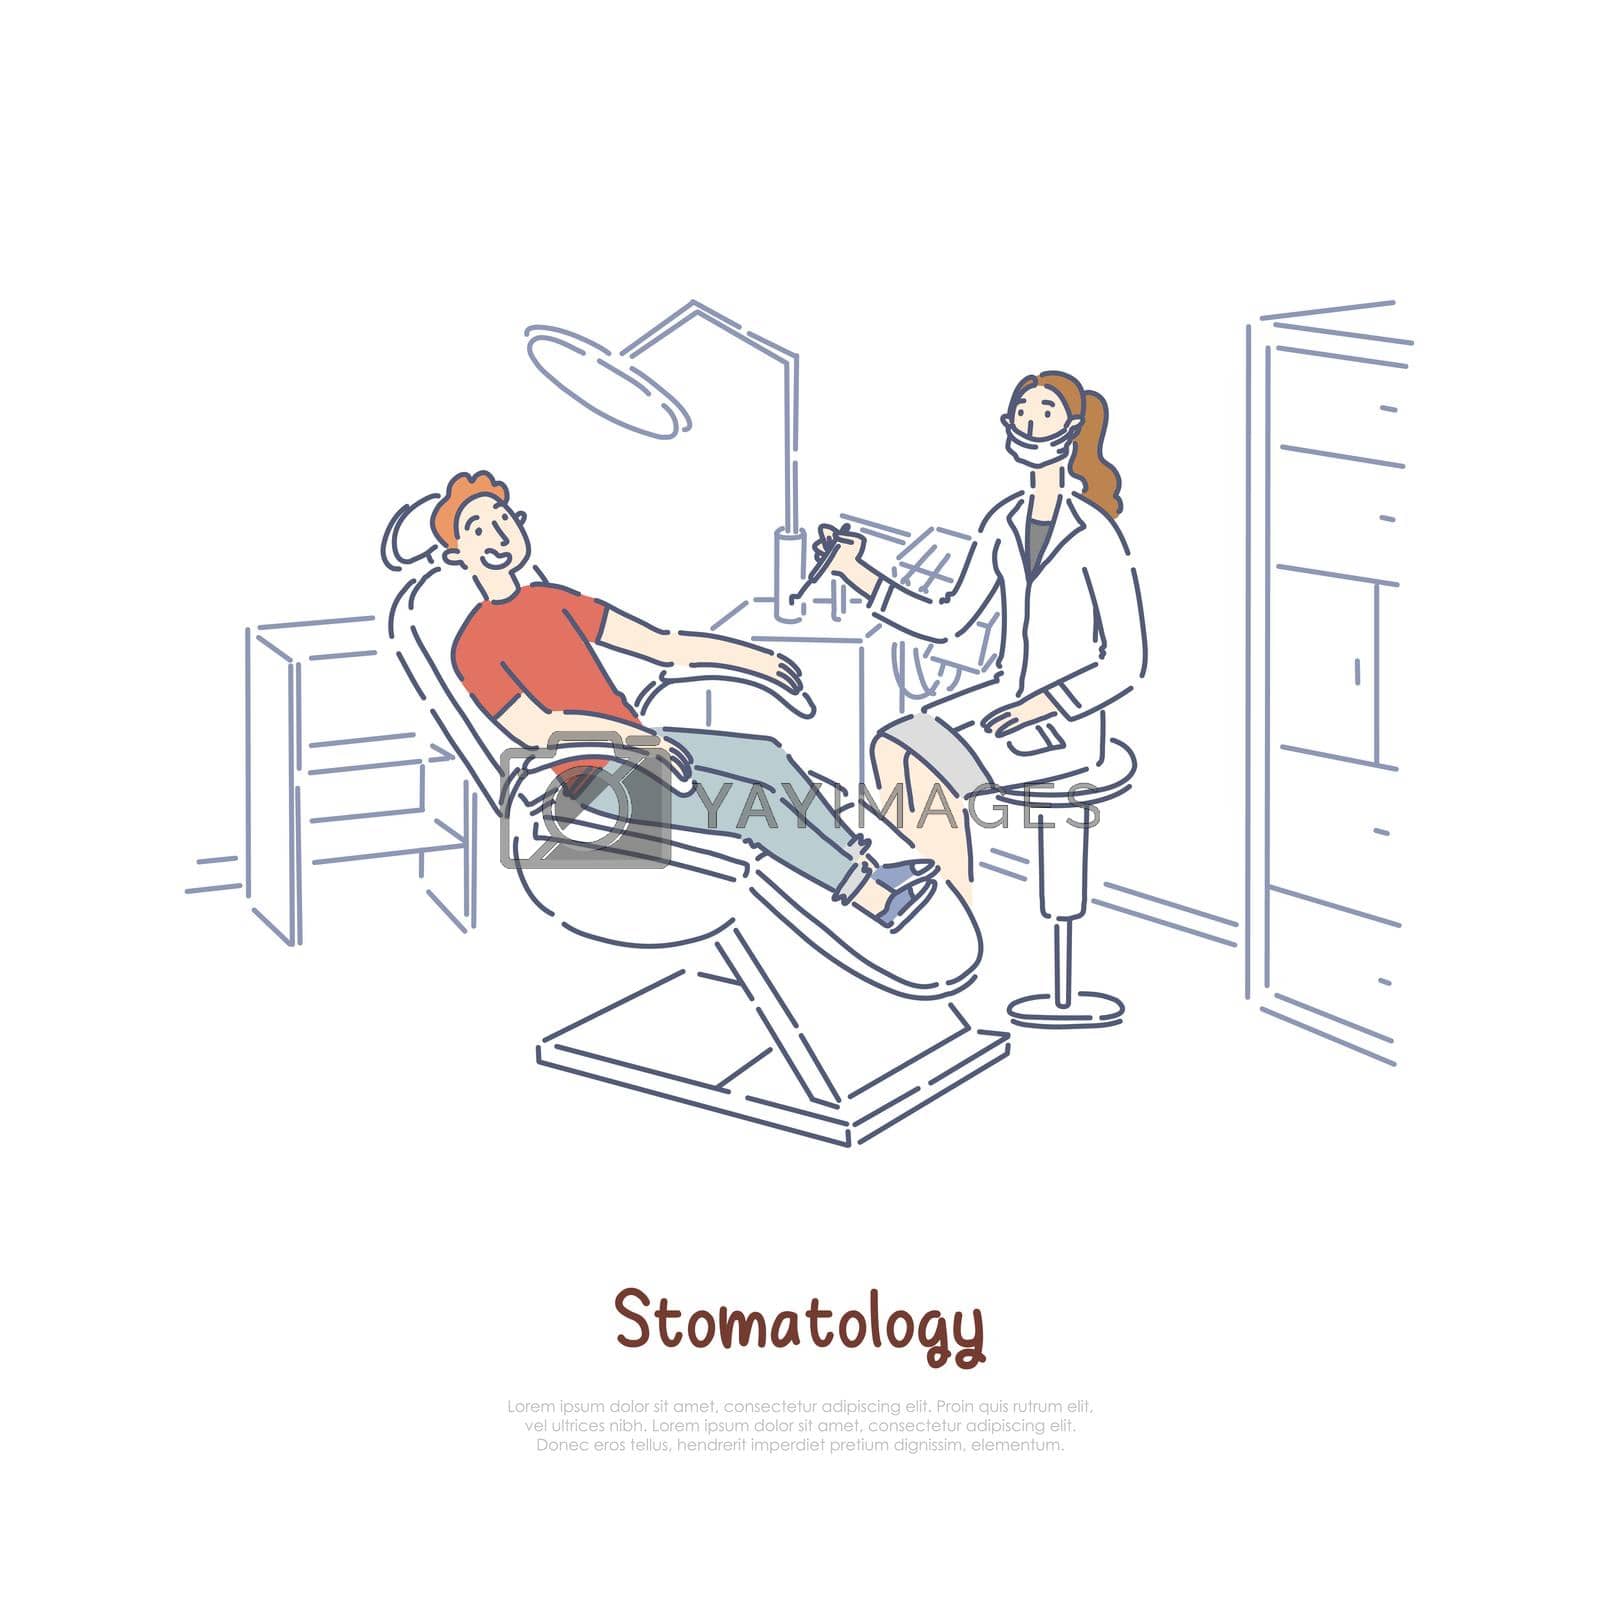 Stomatology clinic, office, patient at dental chair, dentist holding drilling machine, medical equipment banner template. Teeth examining, treatment concept cartoon sketch. Flat vector illustration